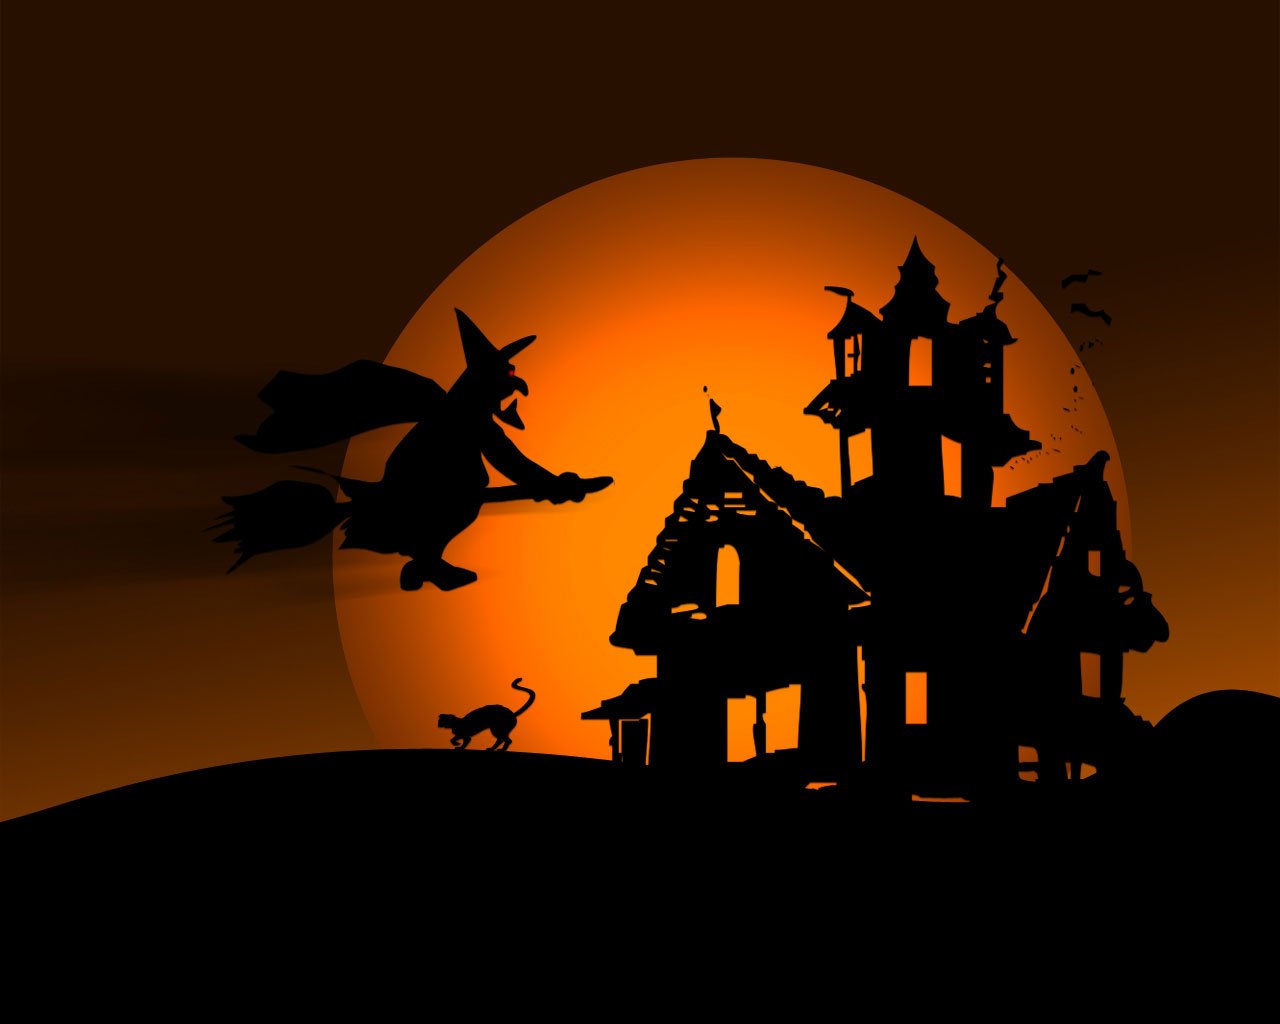 Scary Happy Halloween 2015 Images, Backgrounds, Wallpapers ...